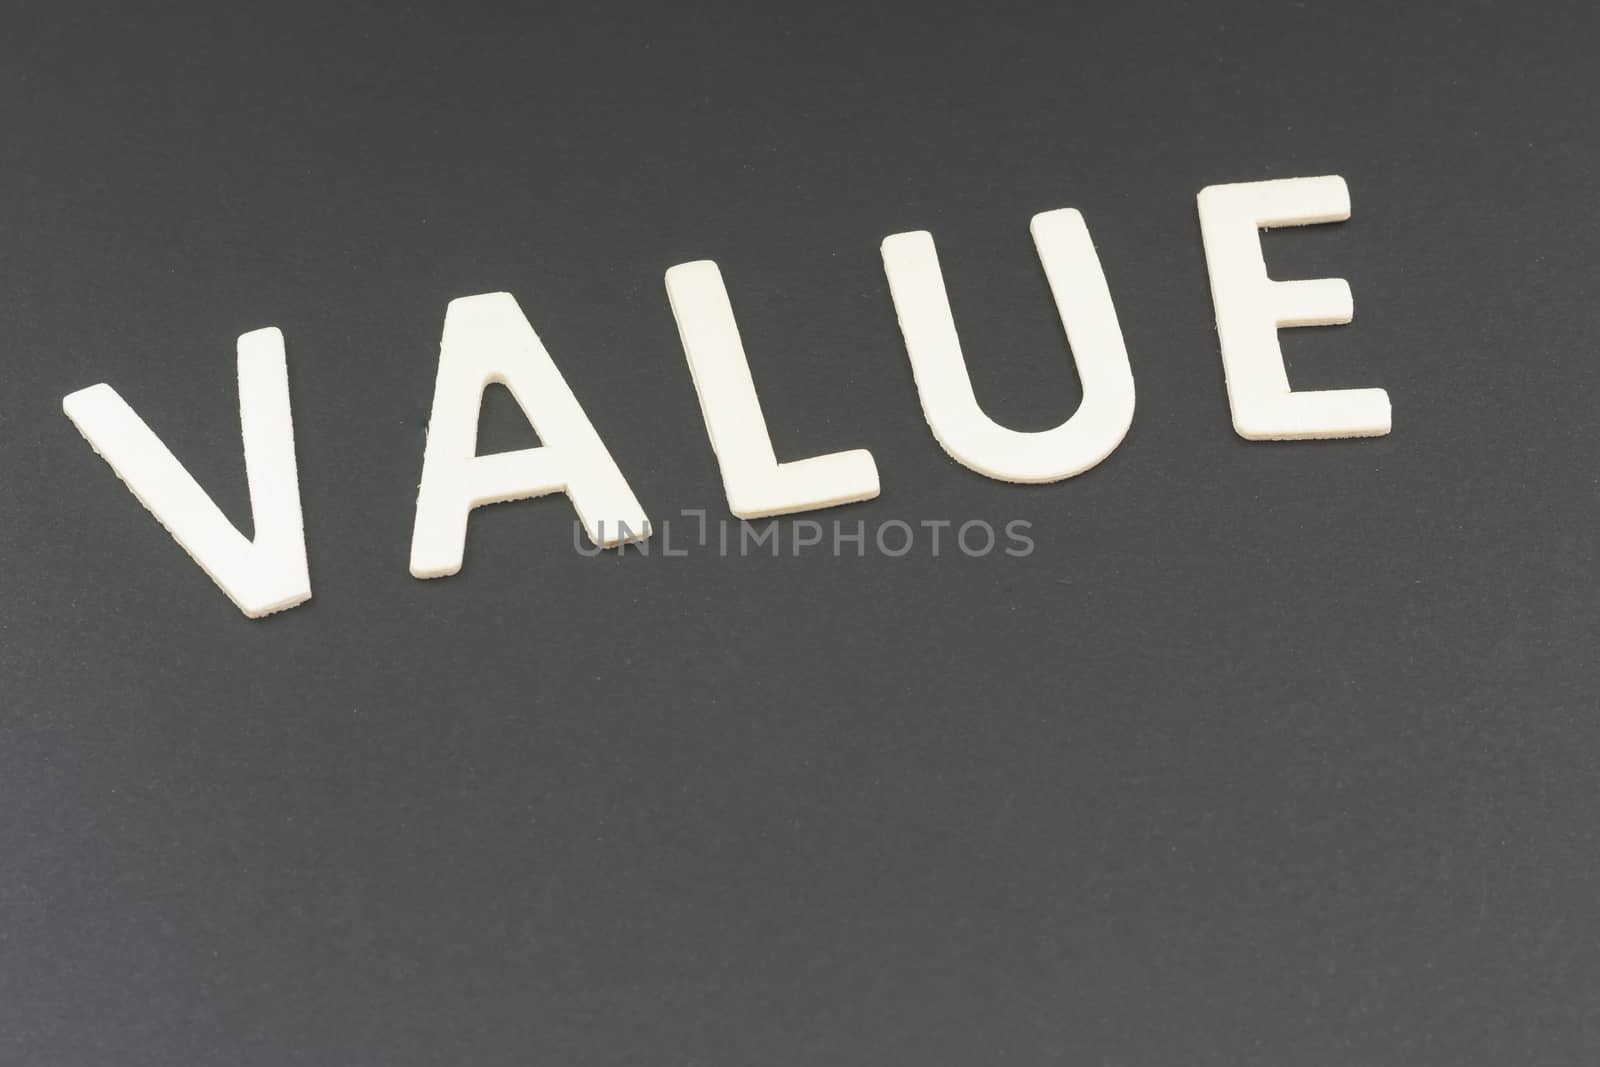 Value by mailos